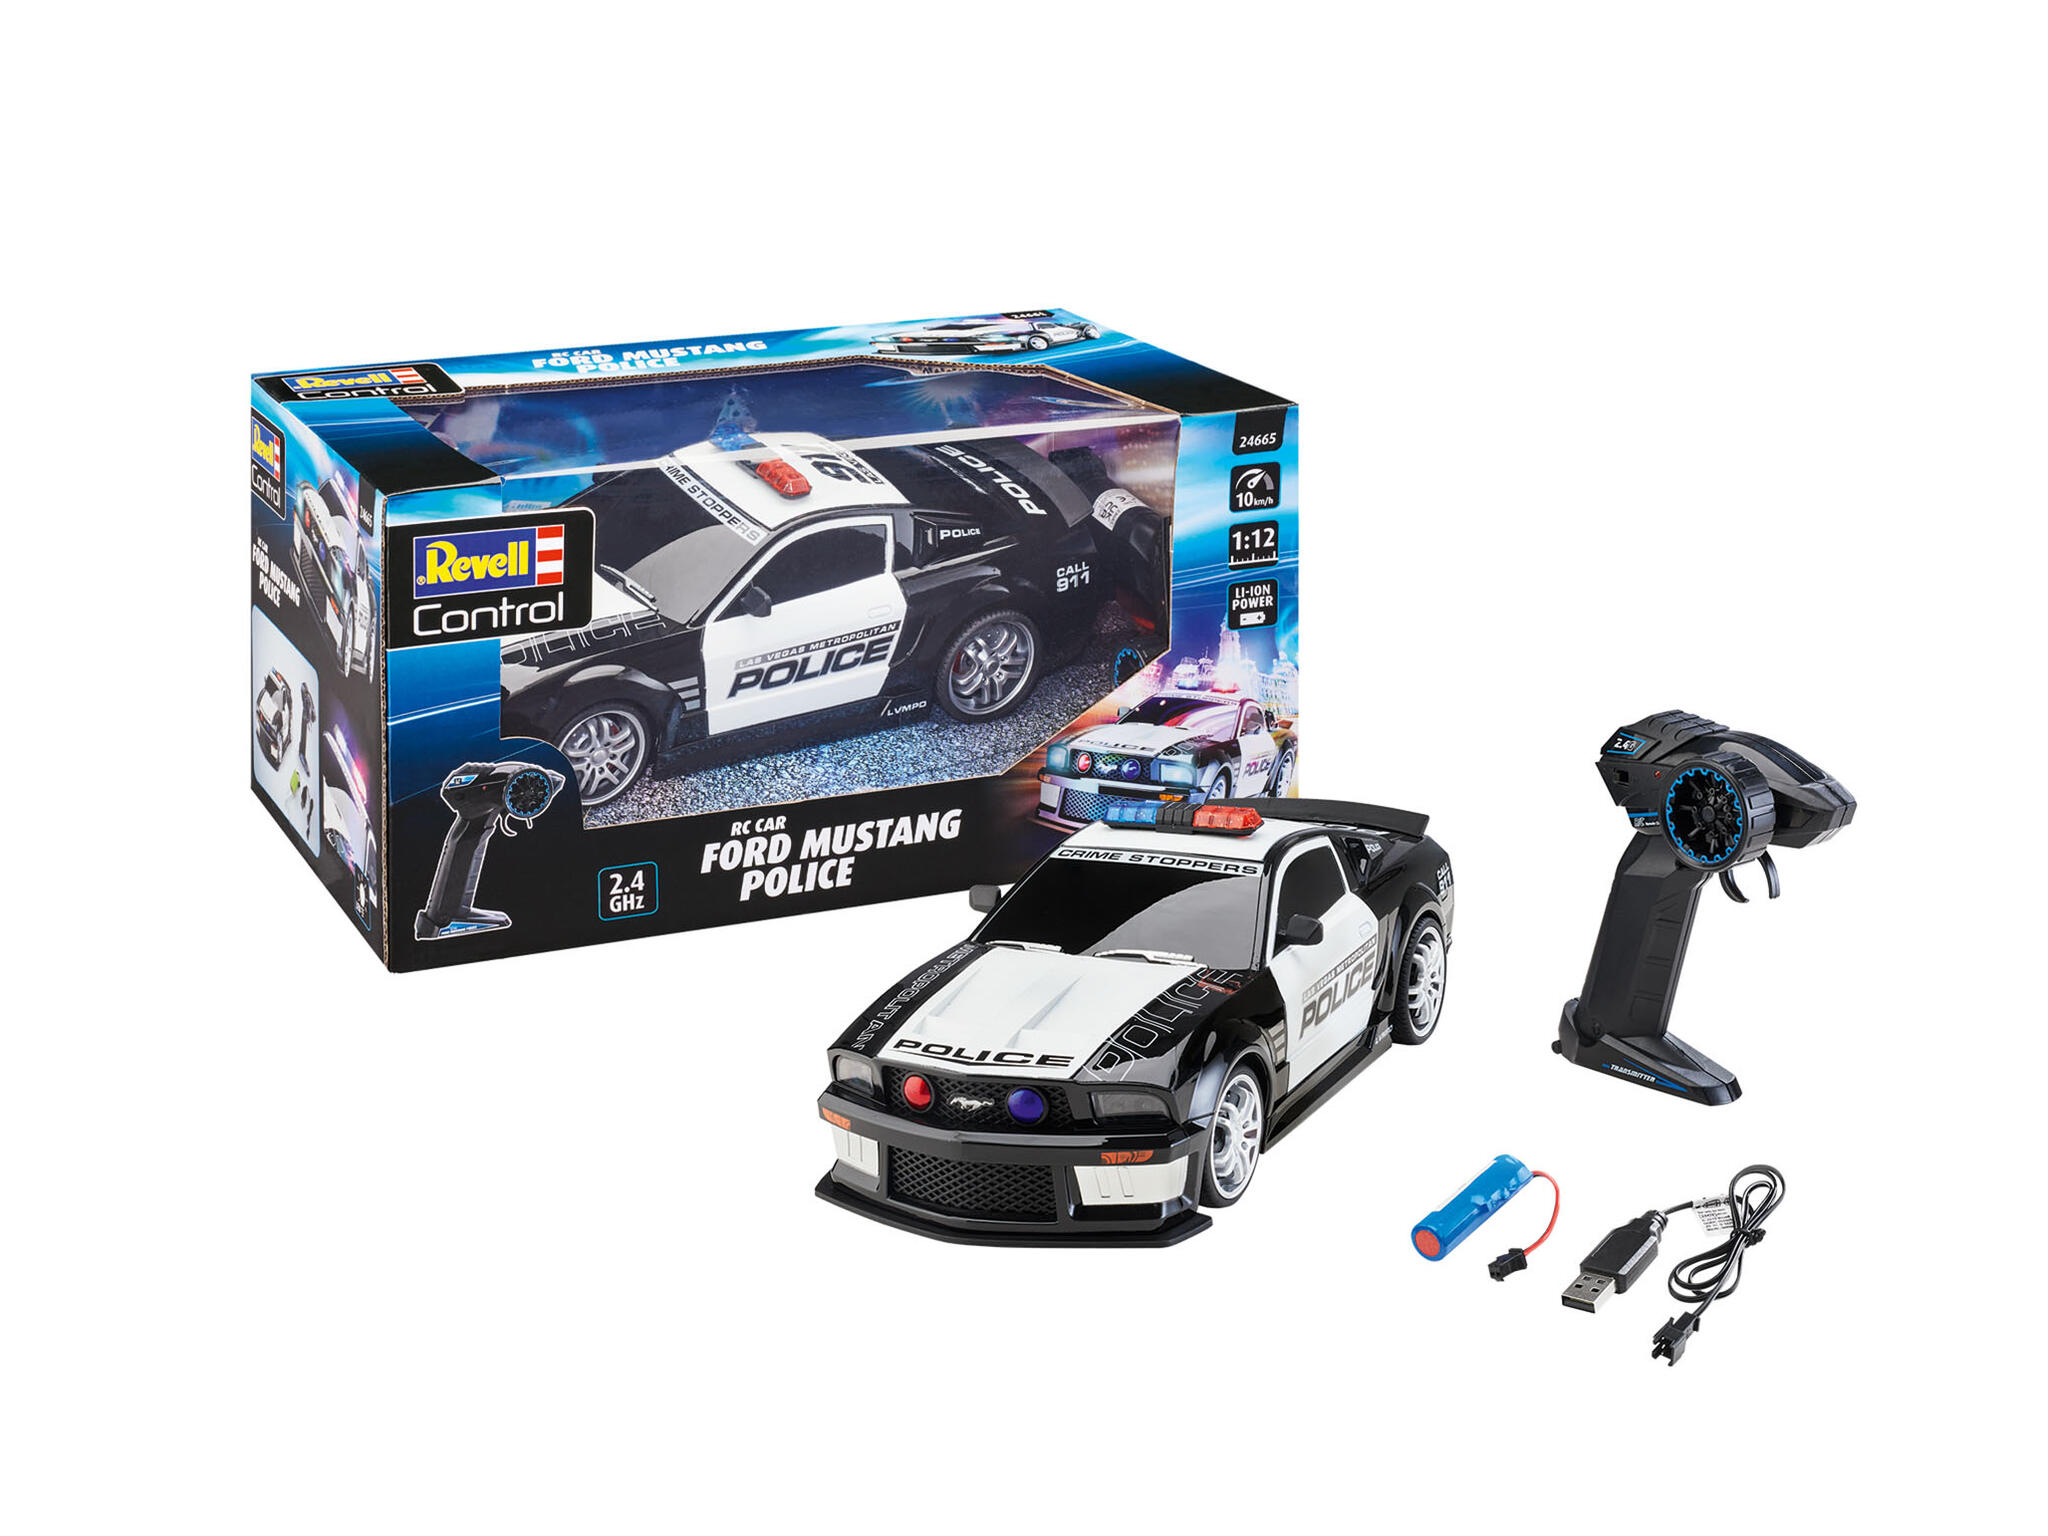 Revell 24665 RC Car Ford Mustang Police Revell Control Ferngesteuertes Polizeiauto